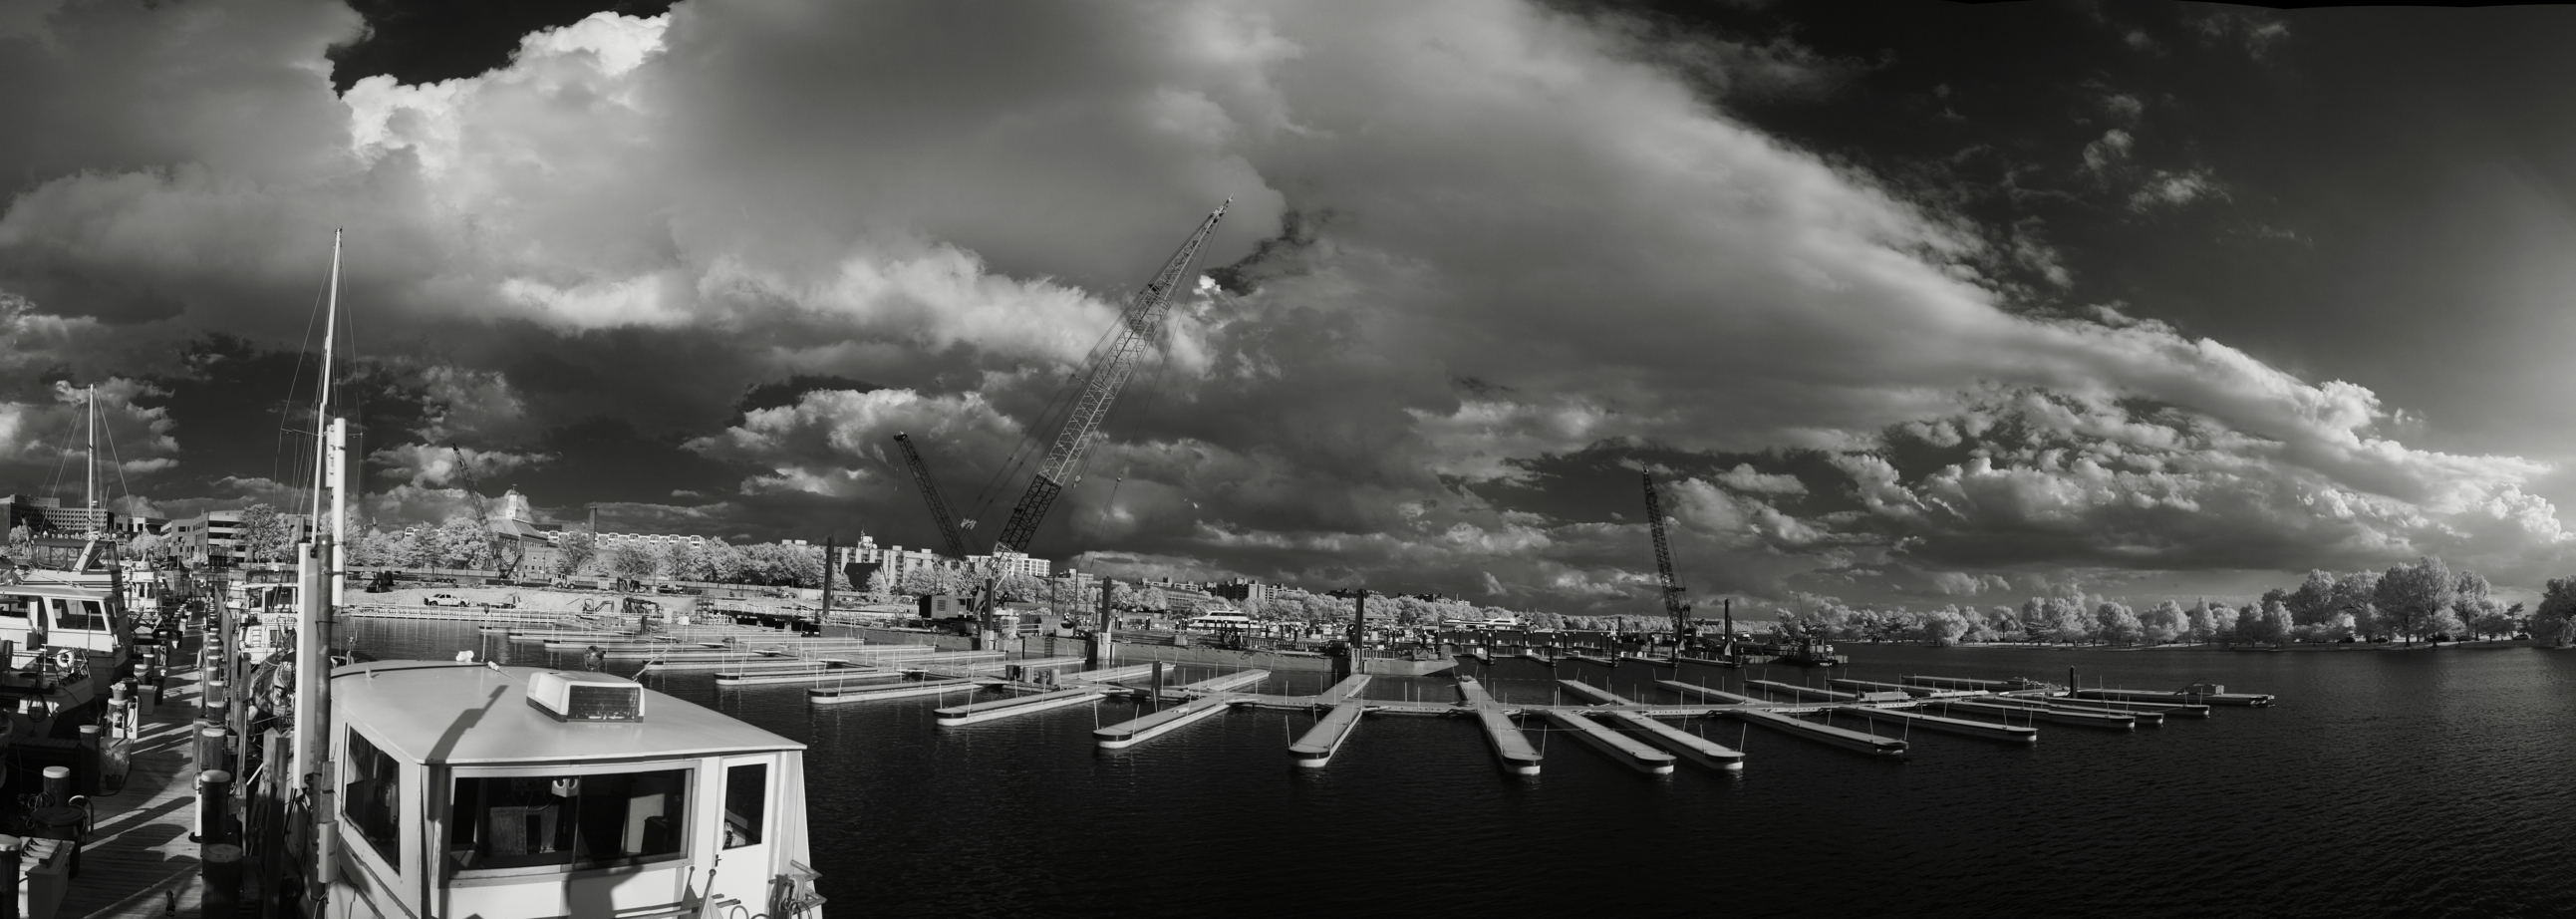 Infrared Panorama of Pleasure Boat Docks and Construction.